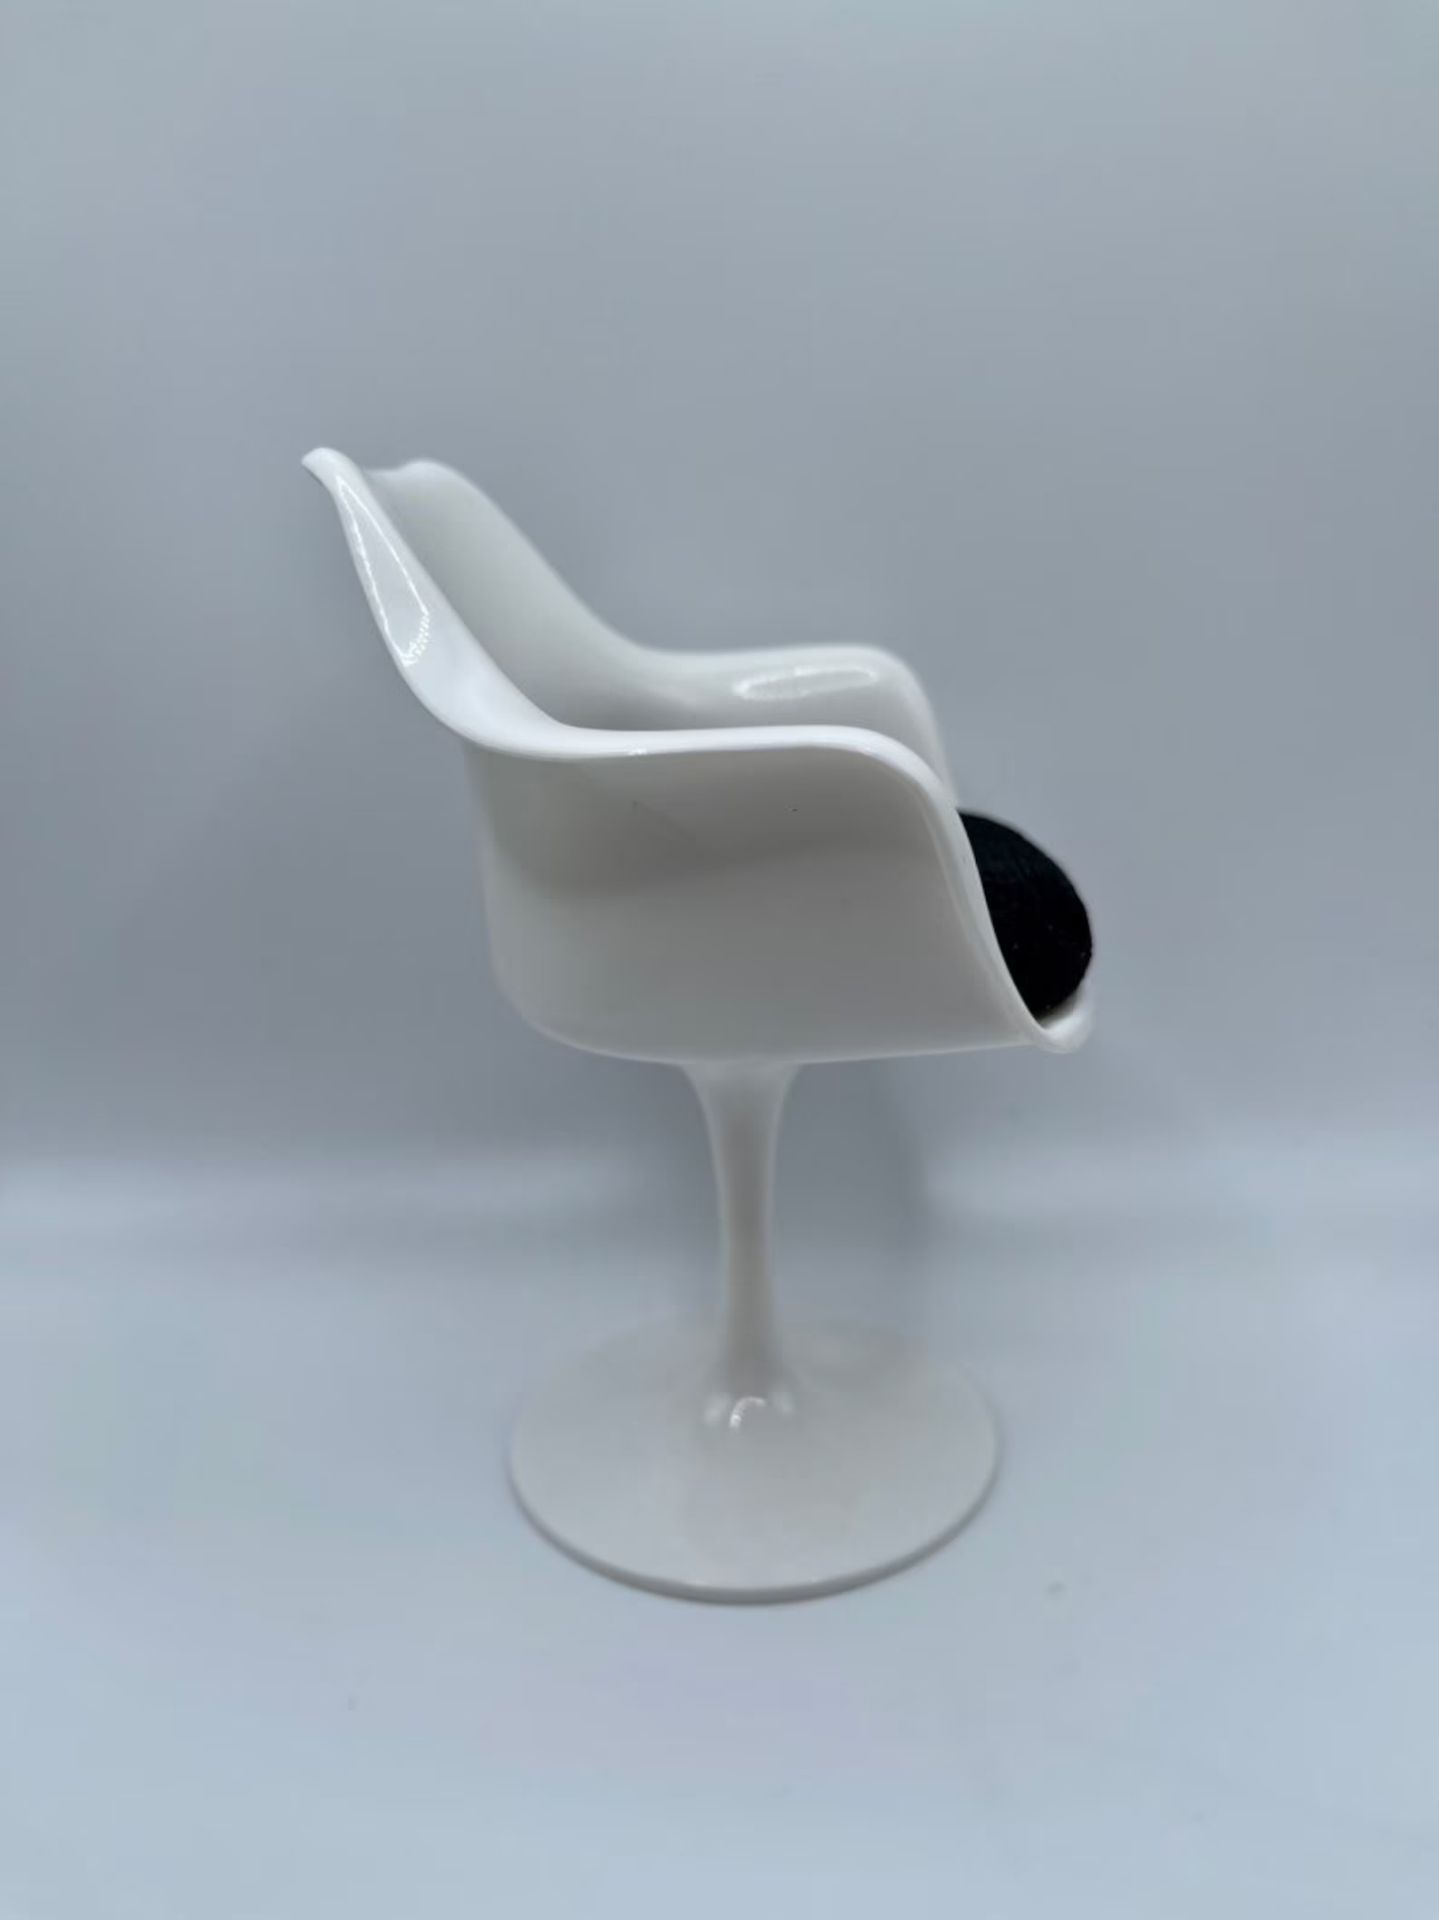 Pair of Tulip Chairs, 1/6 Scale Desk Display - Image 6 of 7